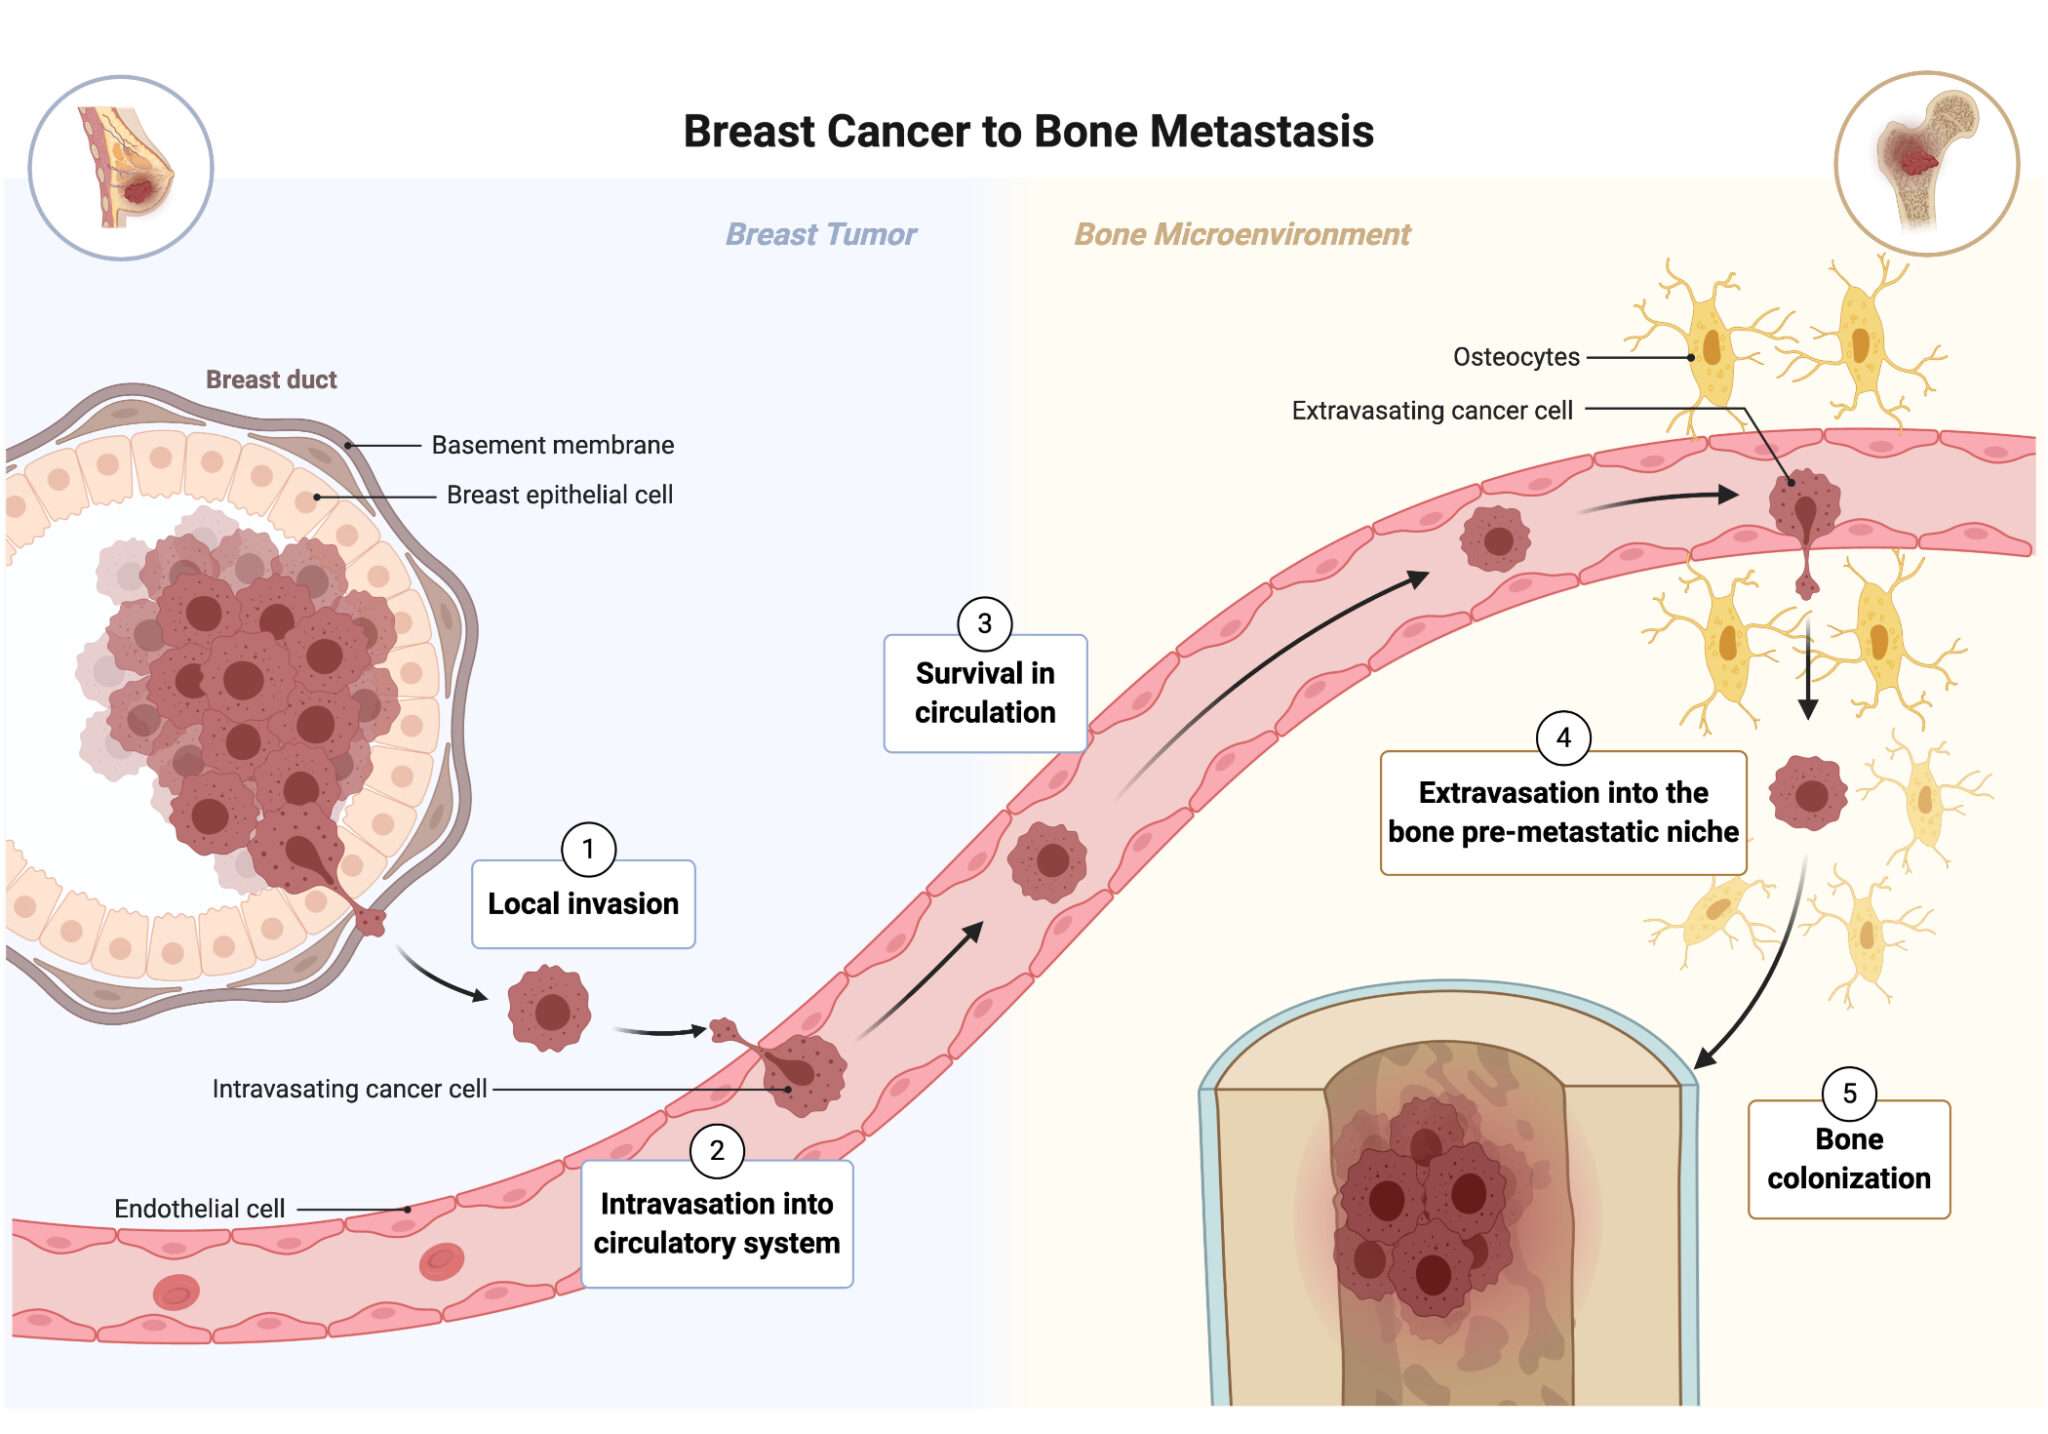 Breast Cancer Metastasis to the Bone Microenvironment